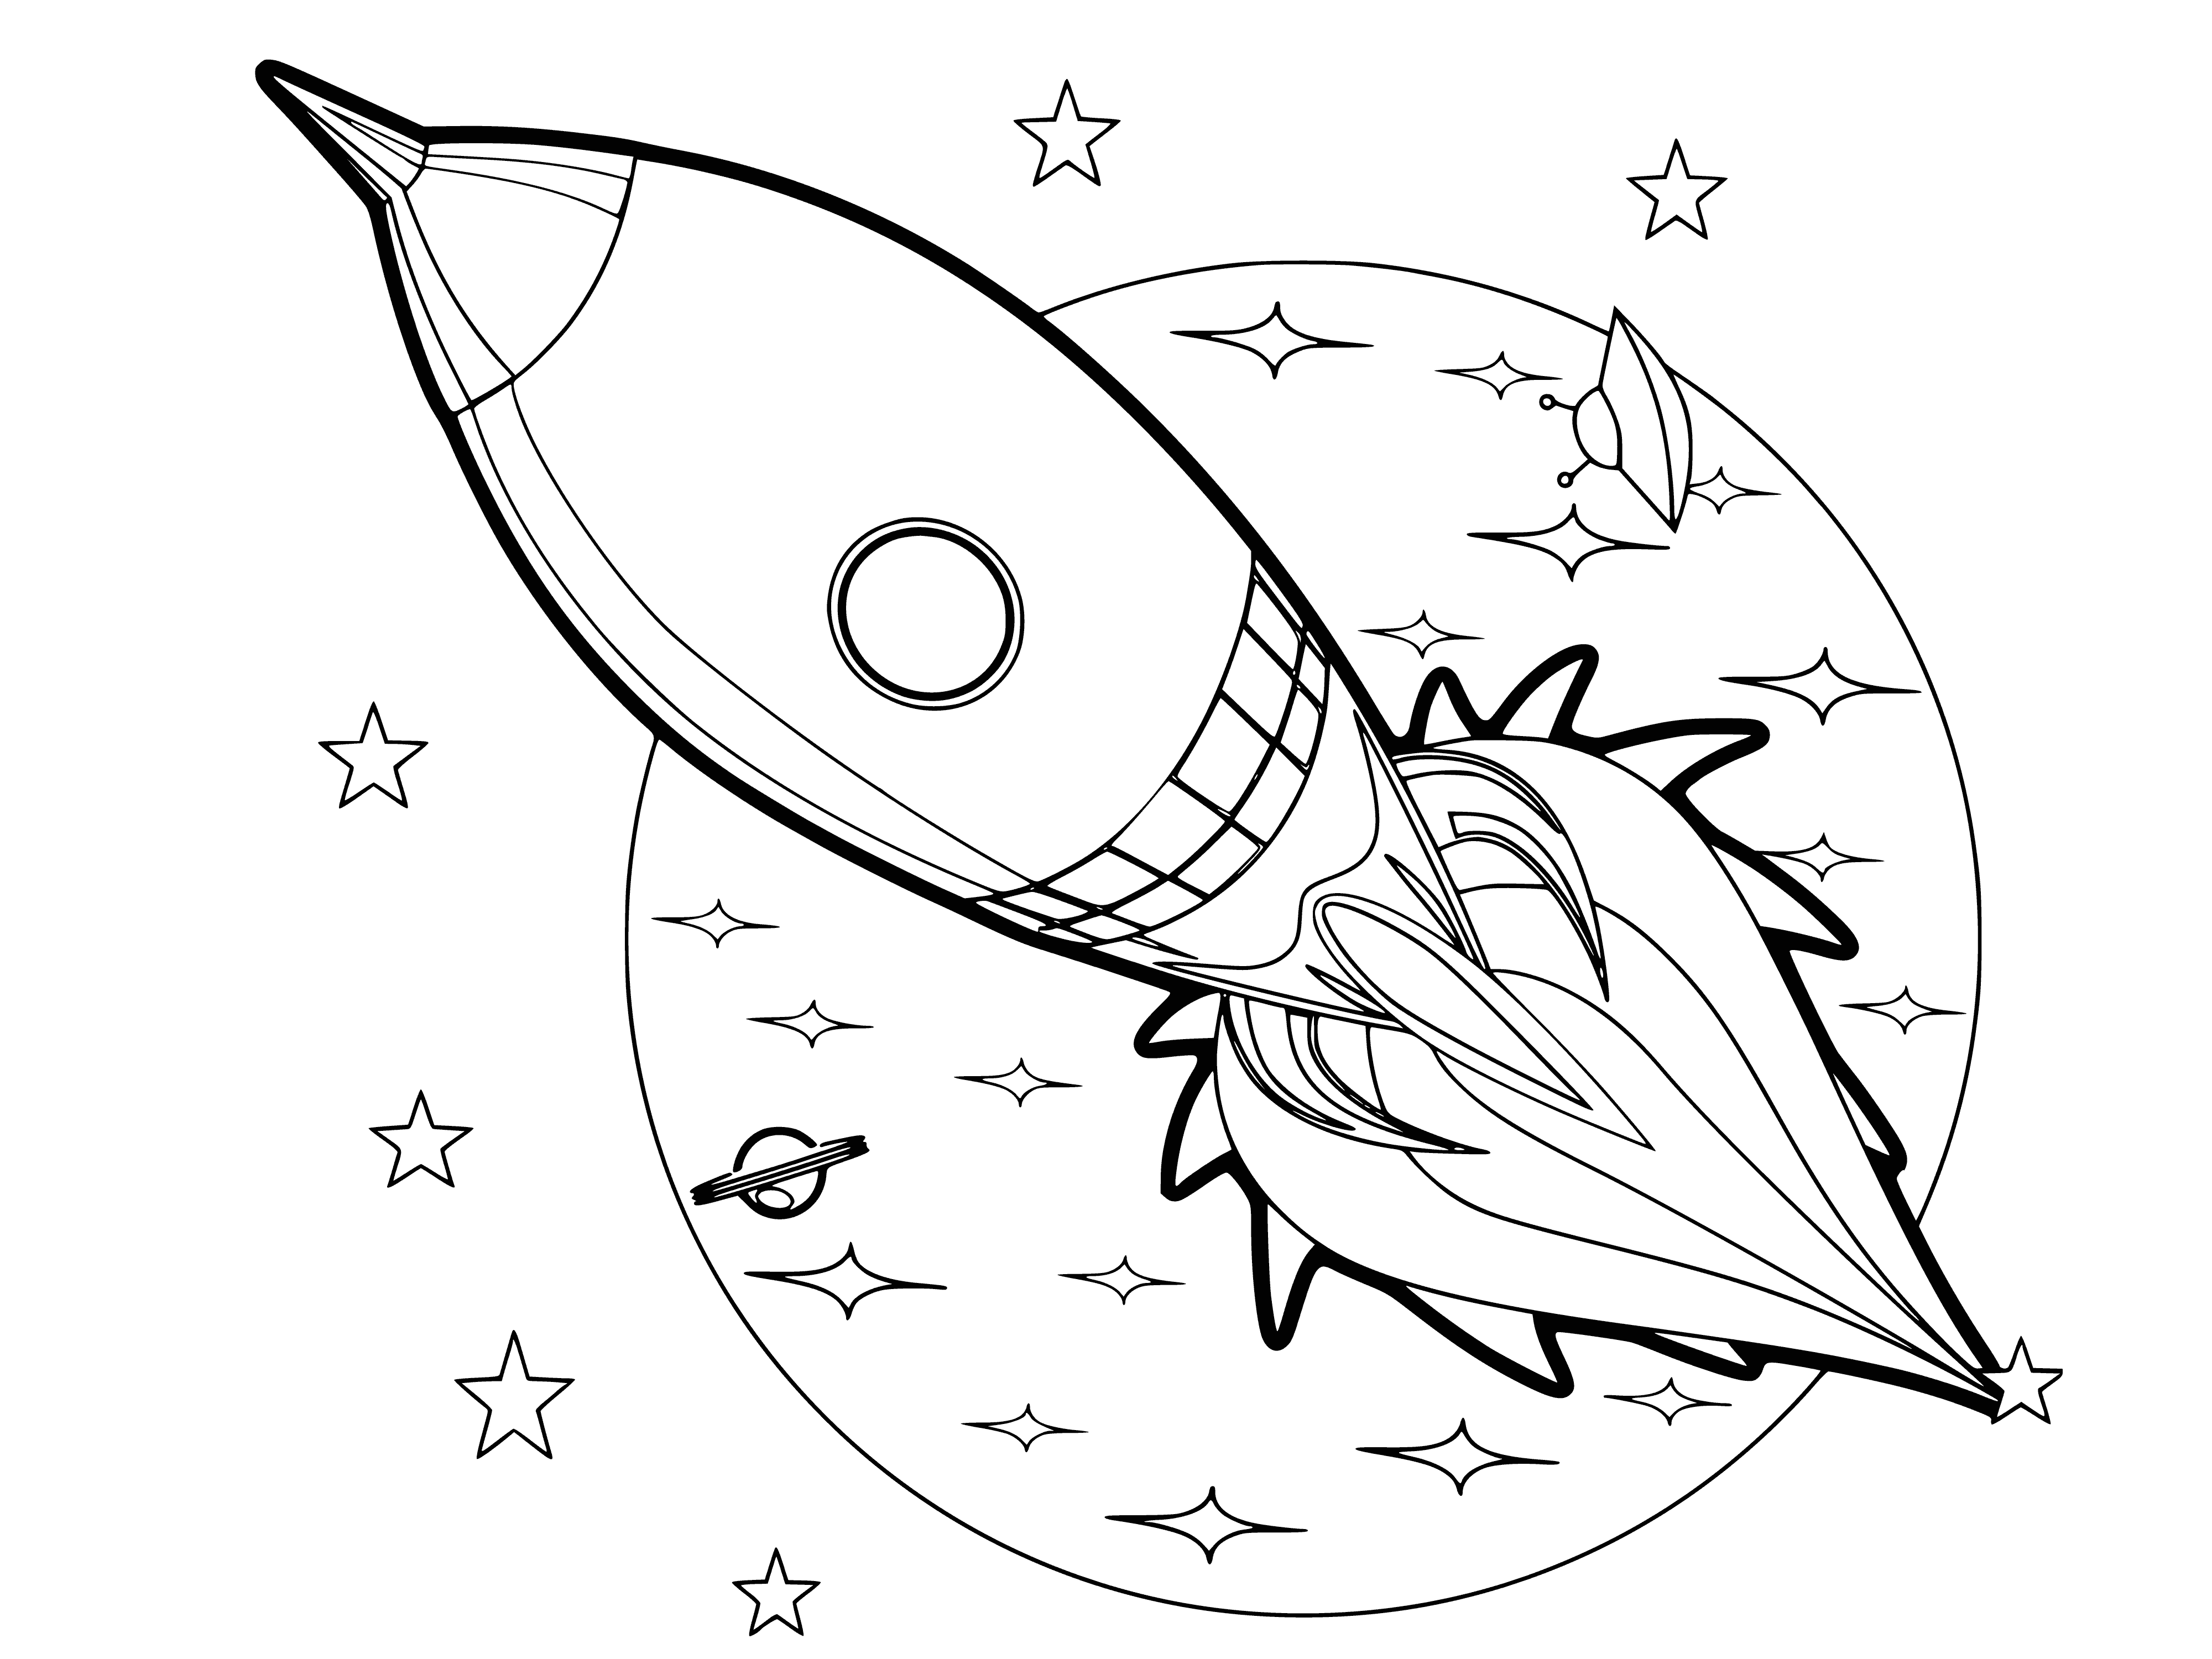 Space rocket coloring page